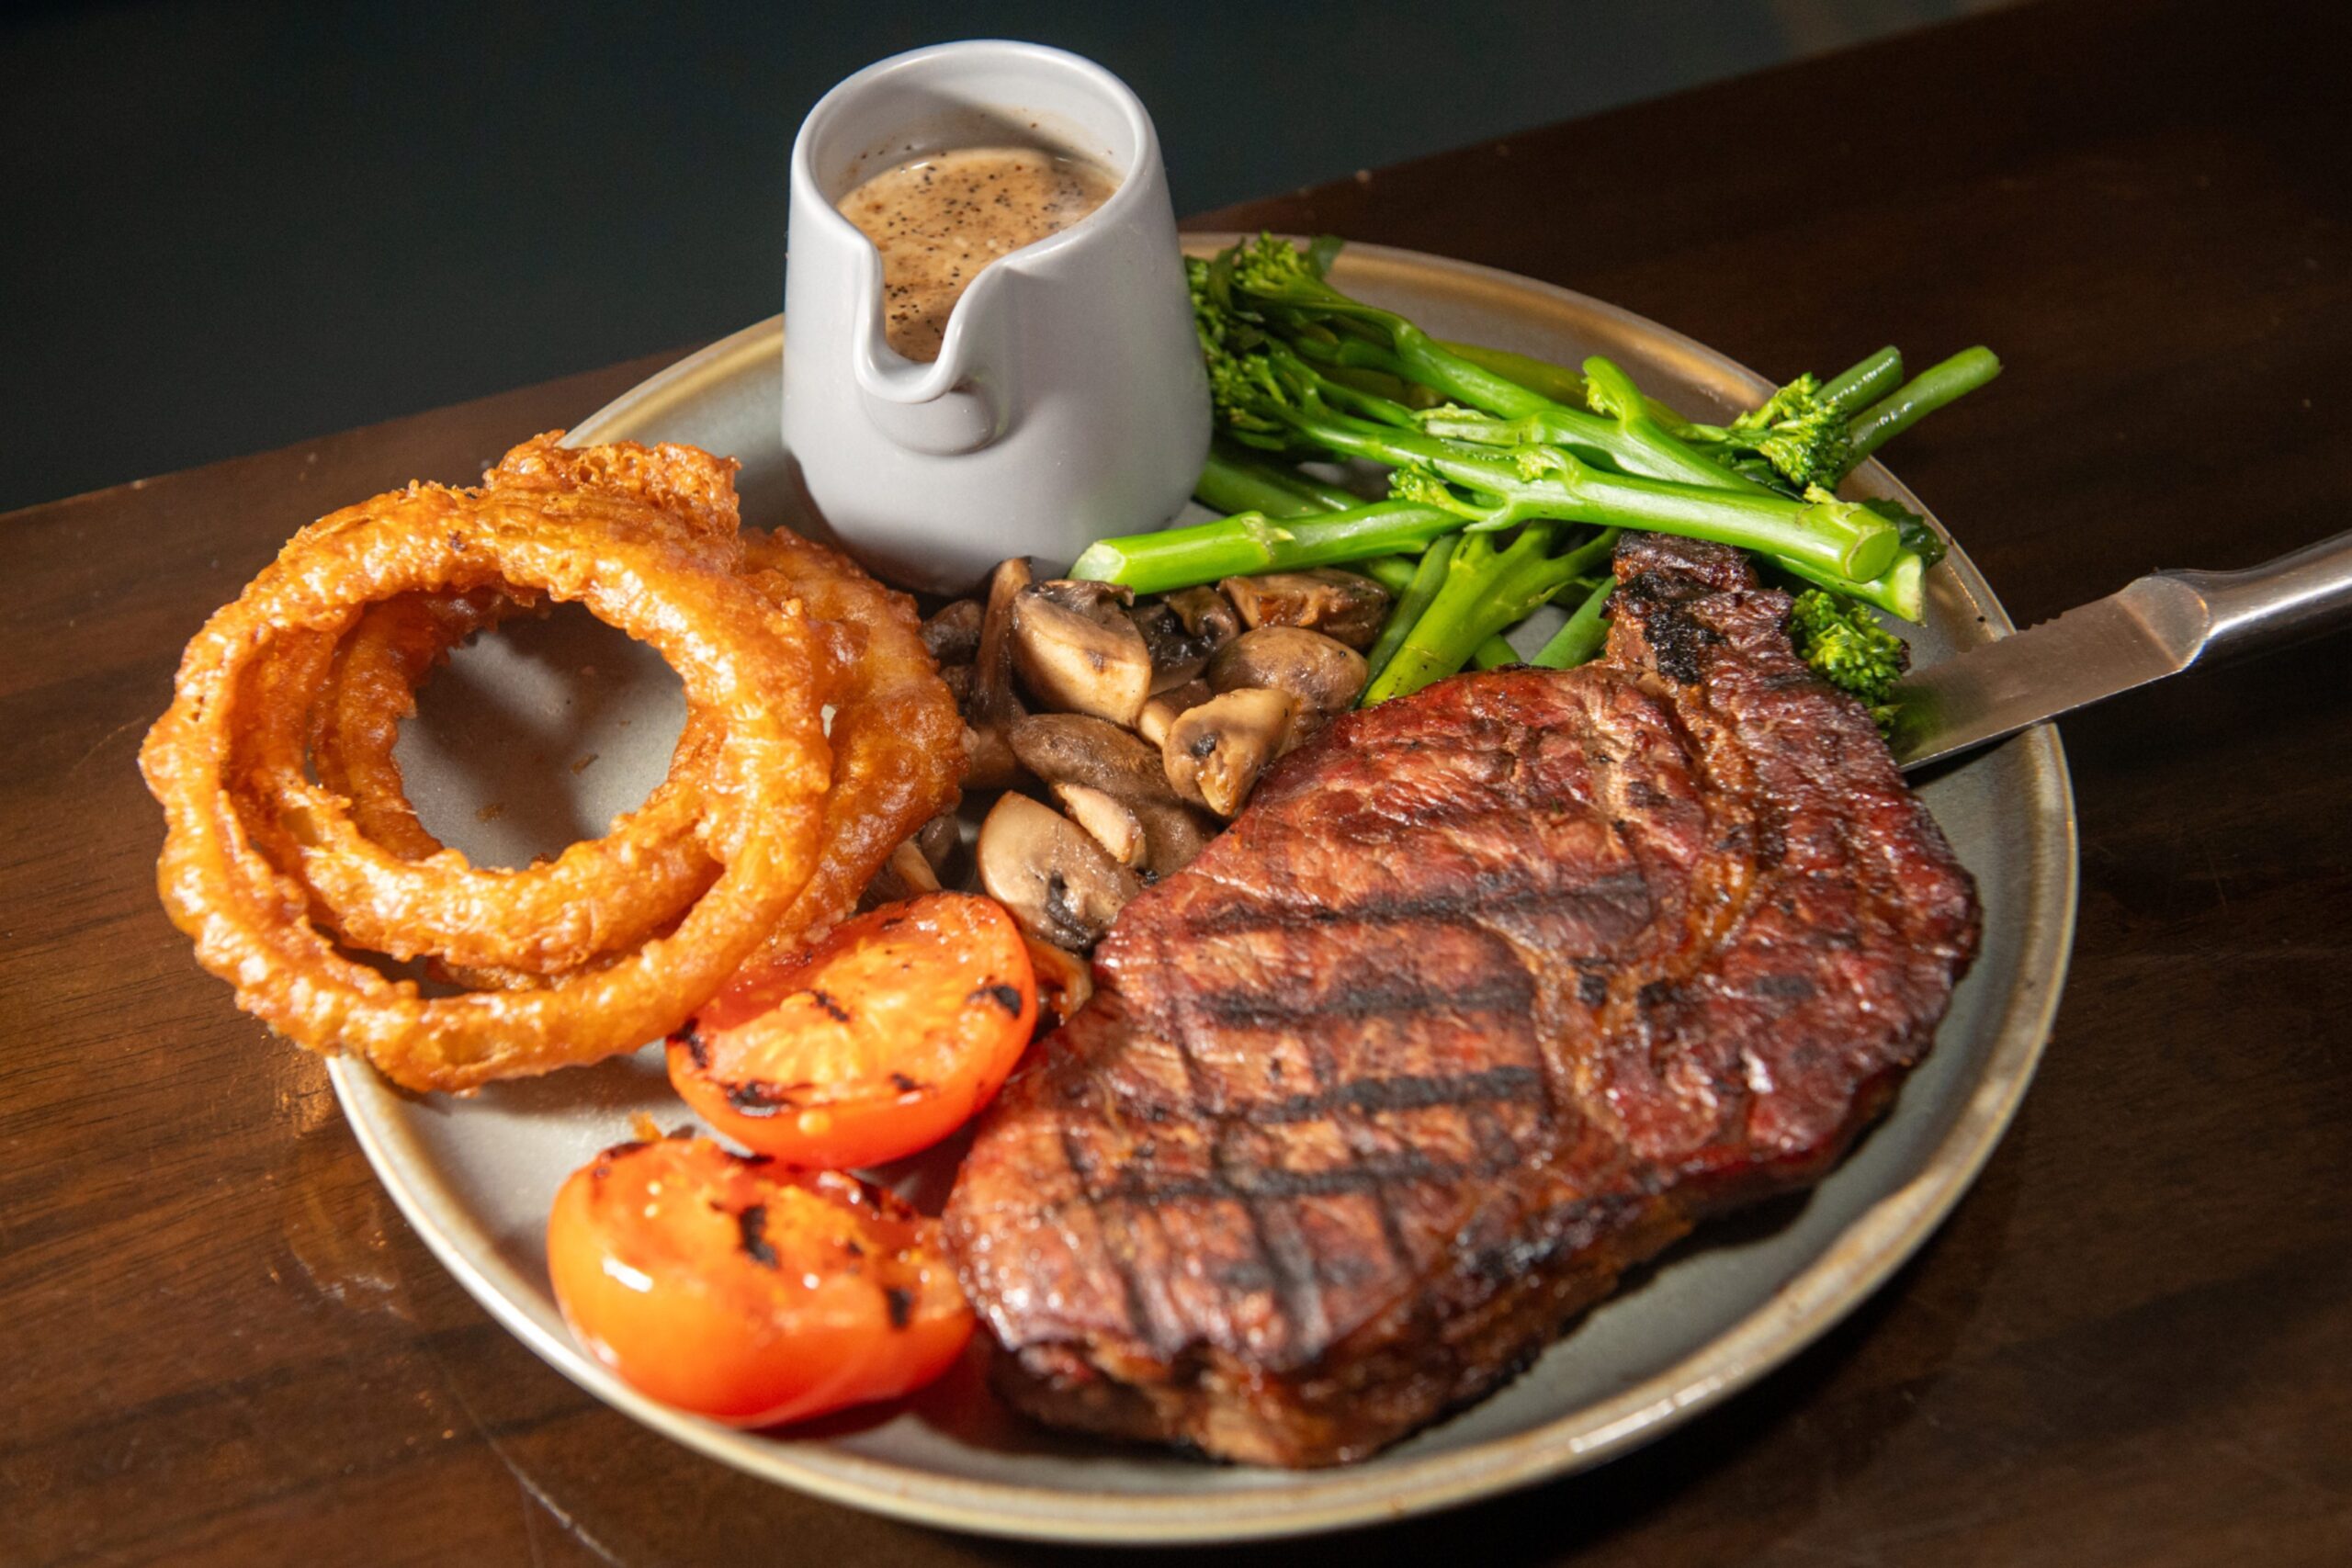 A steak with long stem broccoli, onion rings, mushrooms, tomato and a jug of sauce